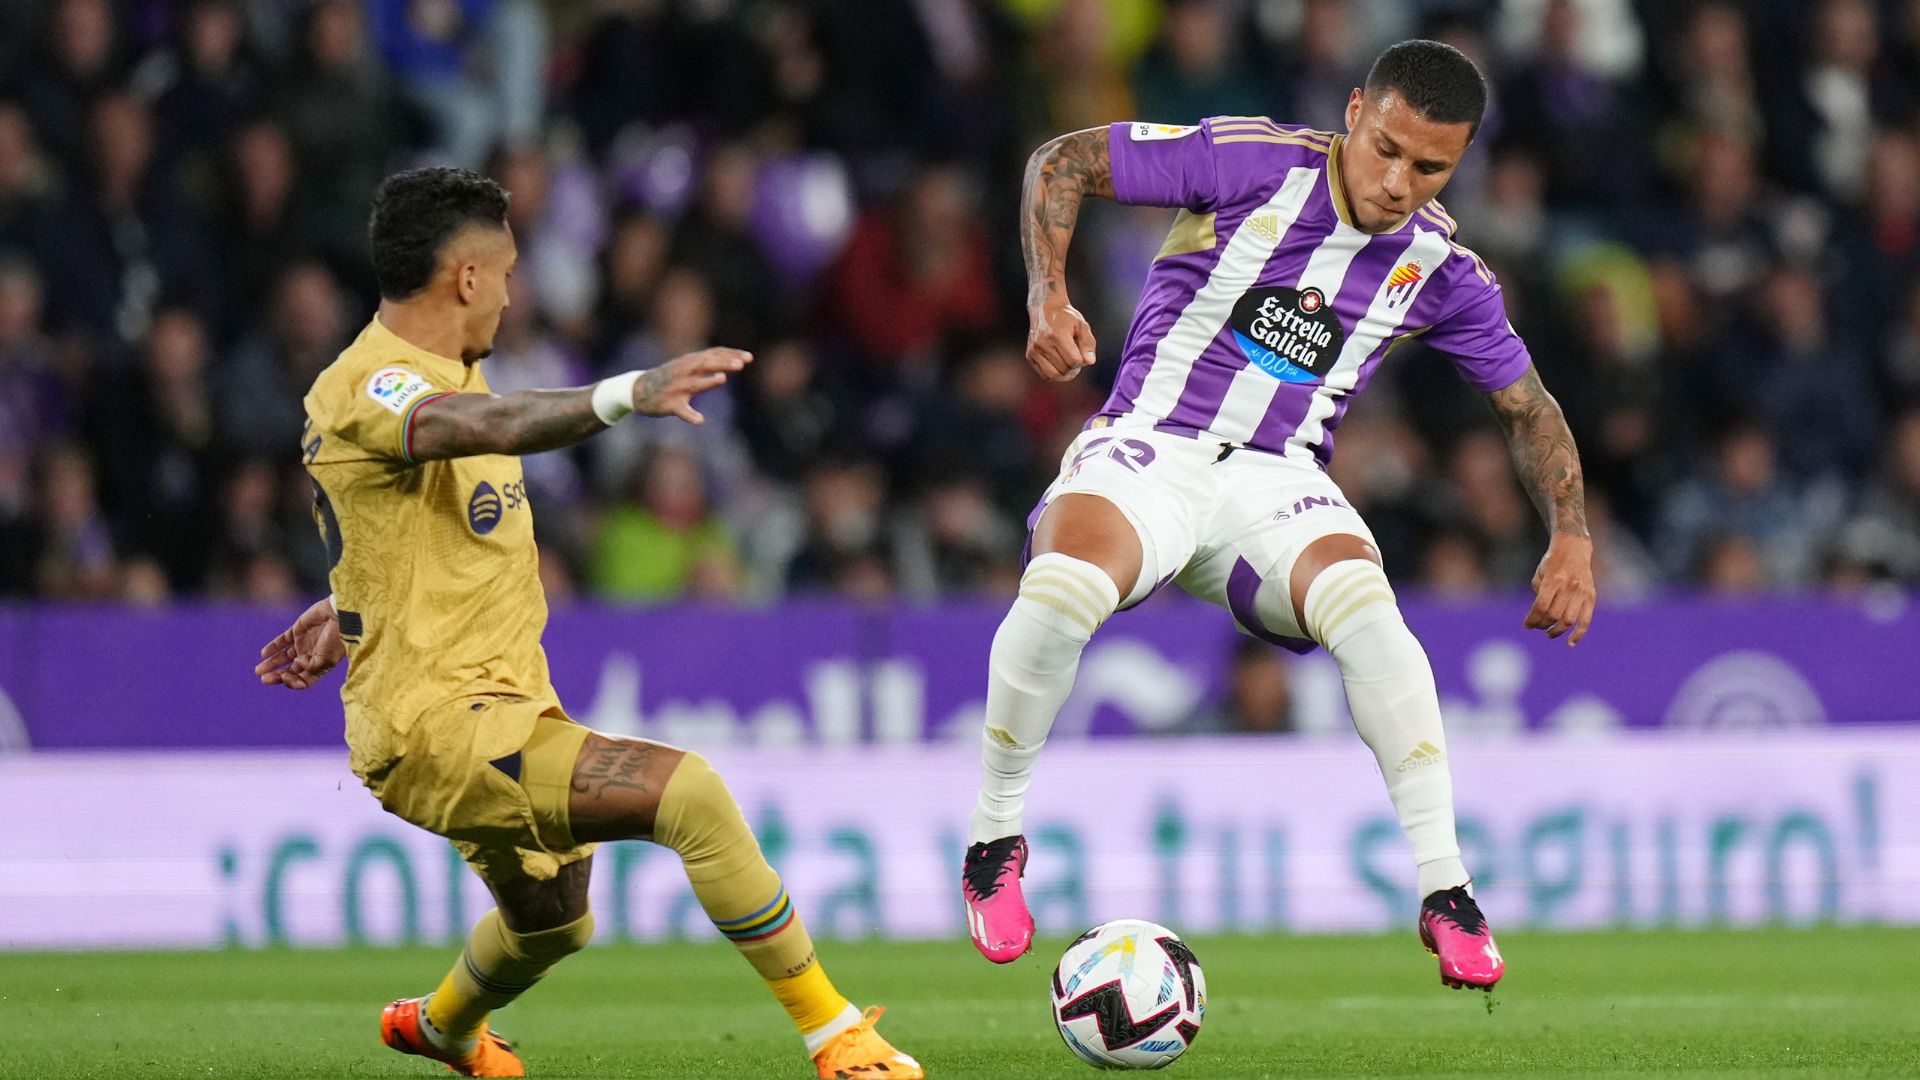 Real Vallladolid beat Barcelona with ease (Credit: Getty Images)